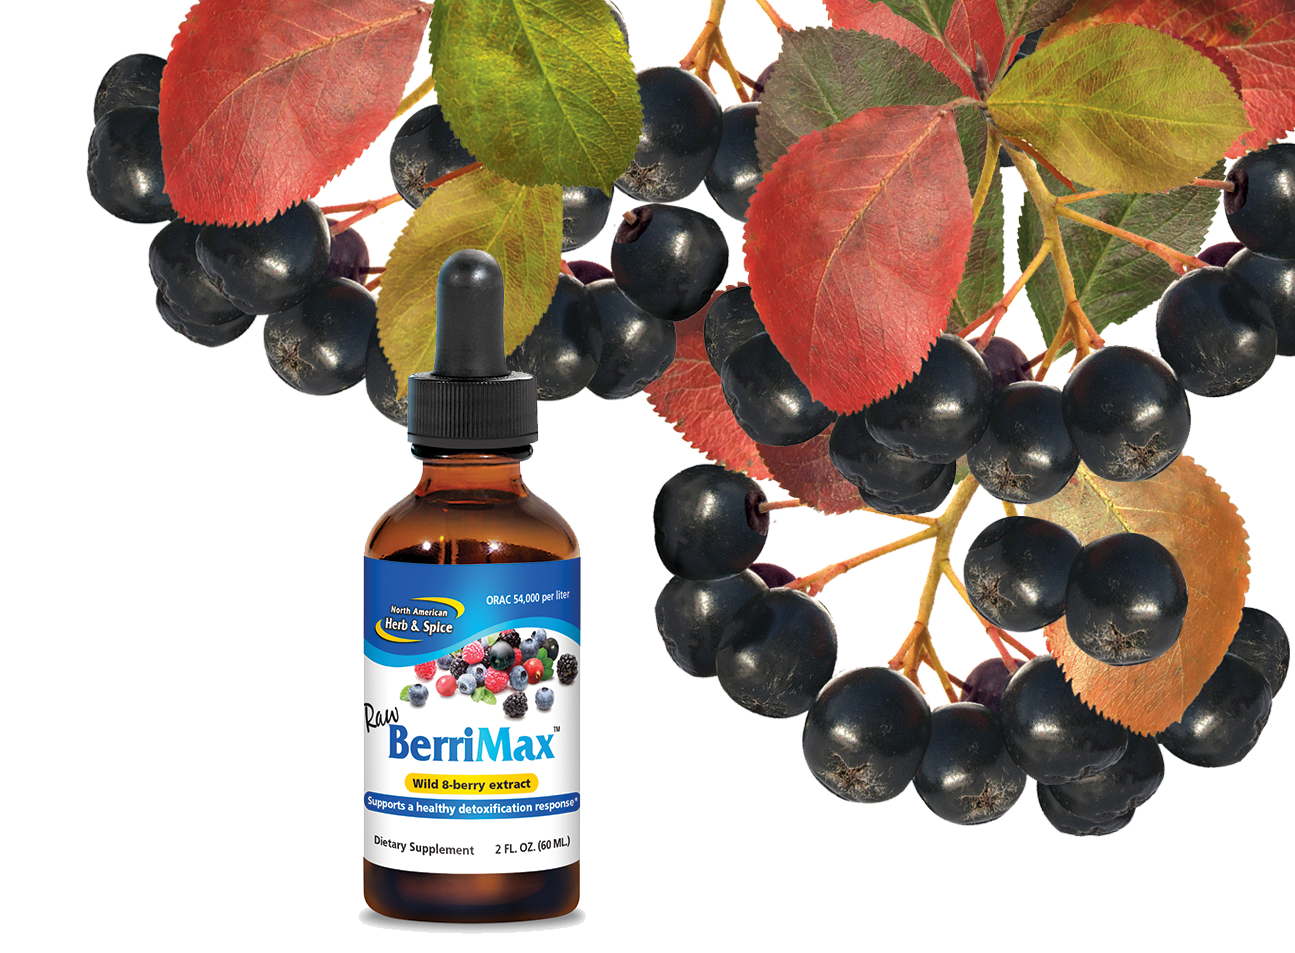 Choke Cherry ingredient with BerriMax product